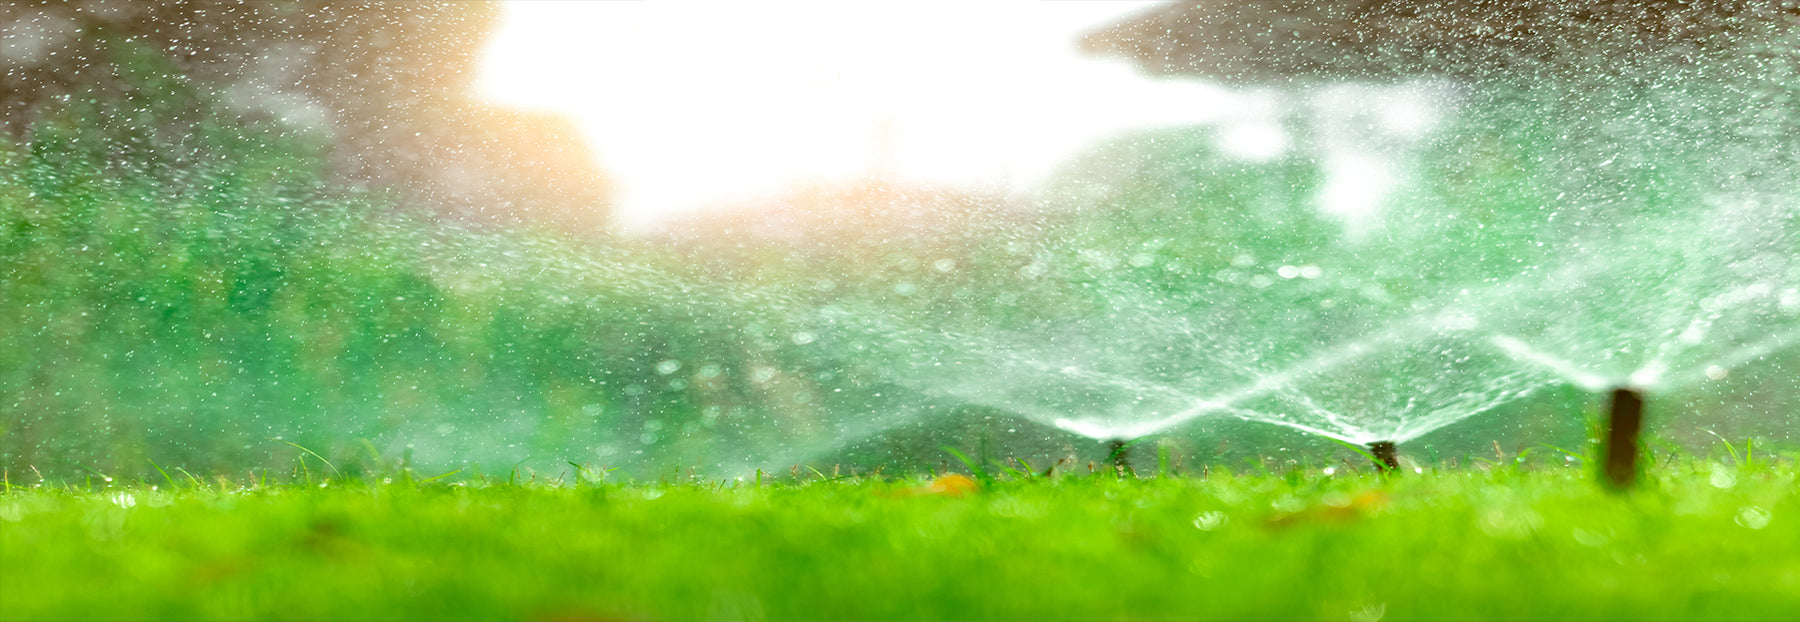 A Beginner's Guide To Irrigation